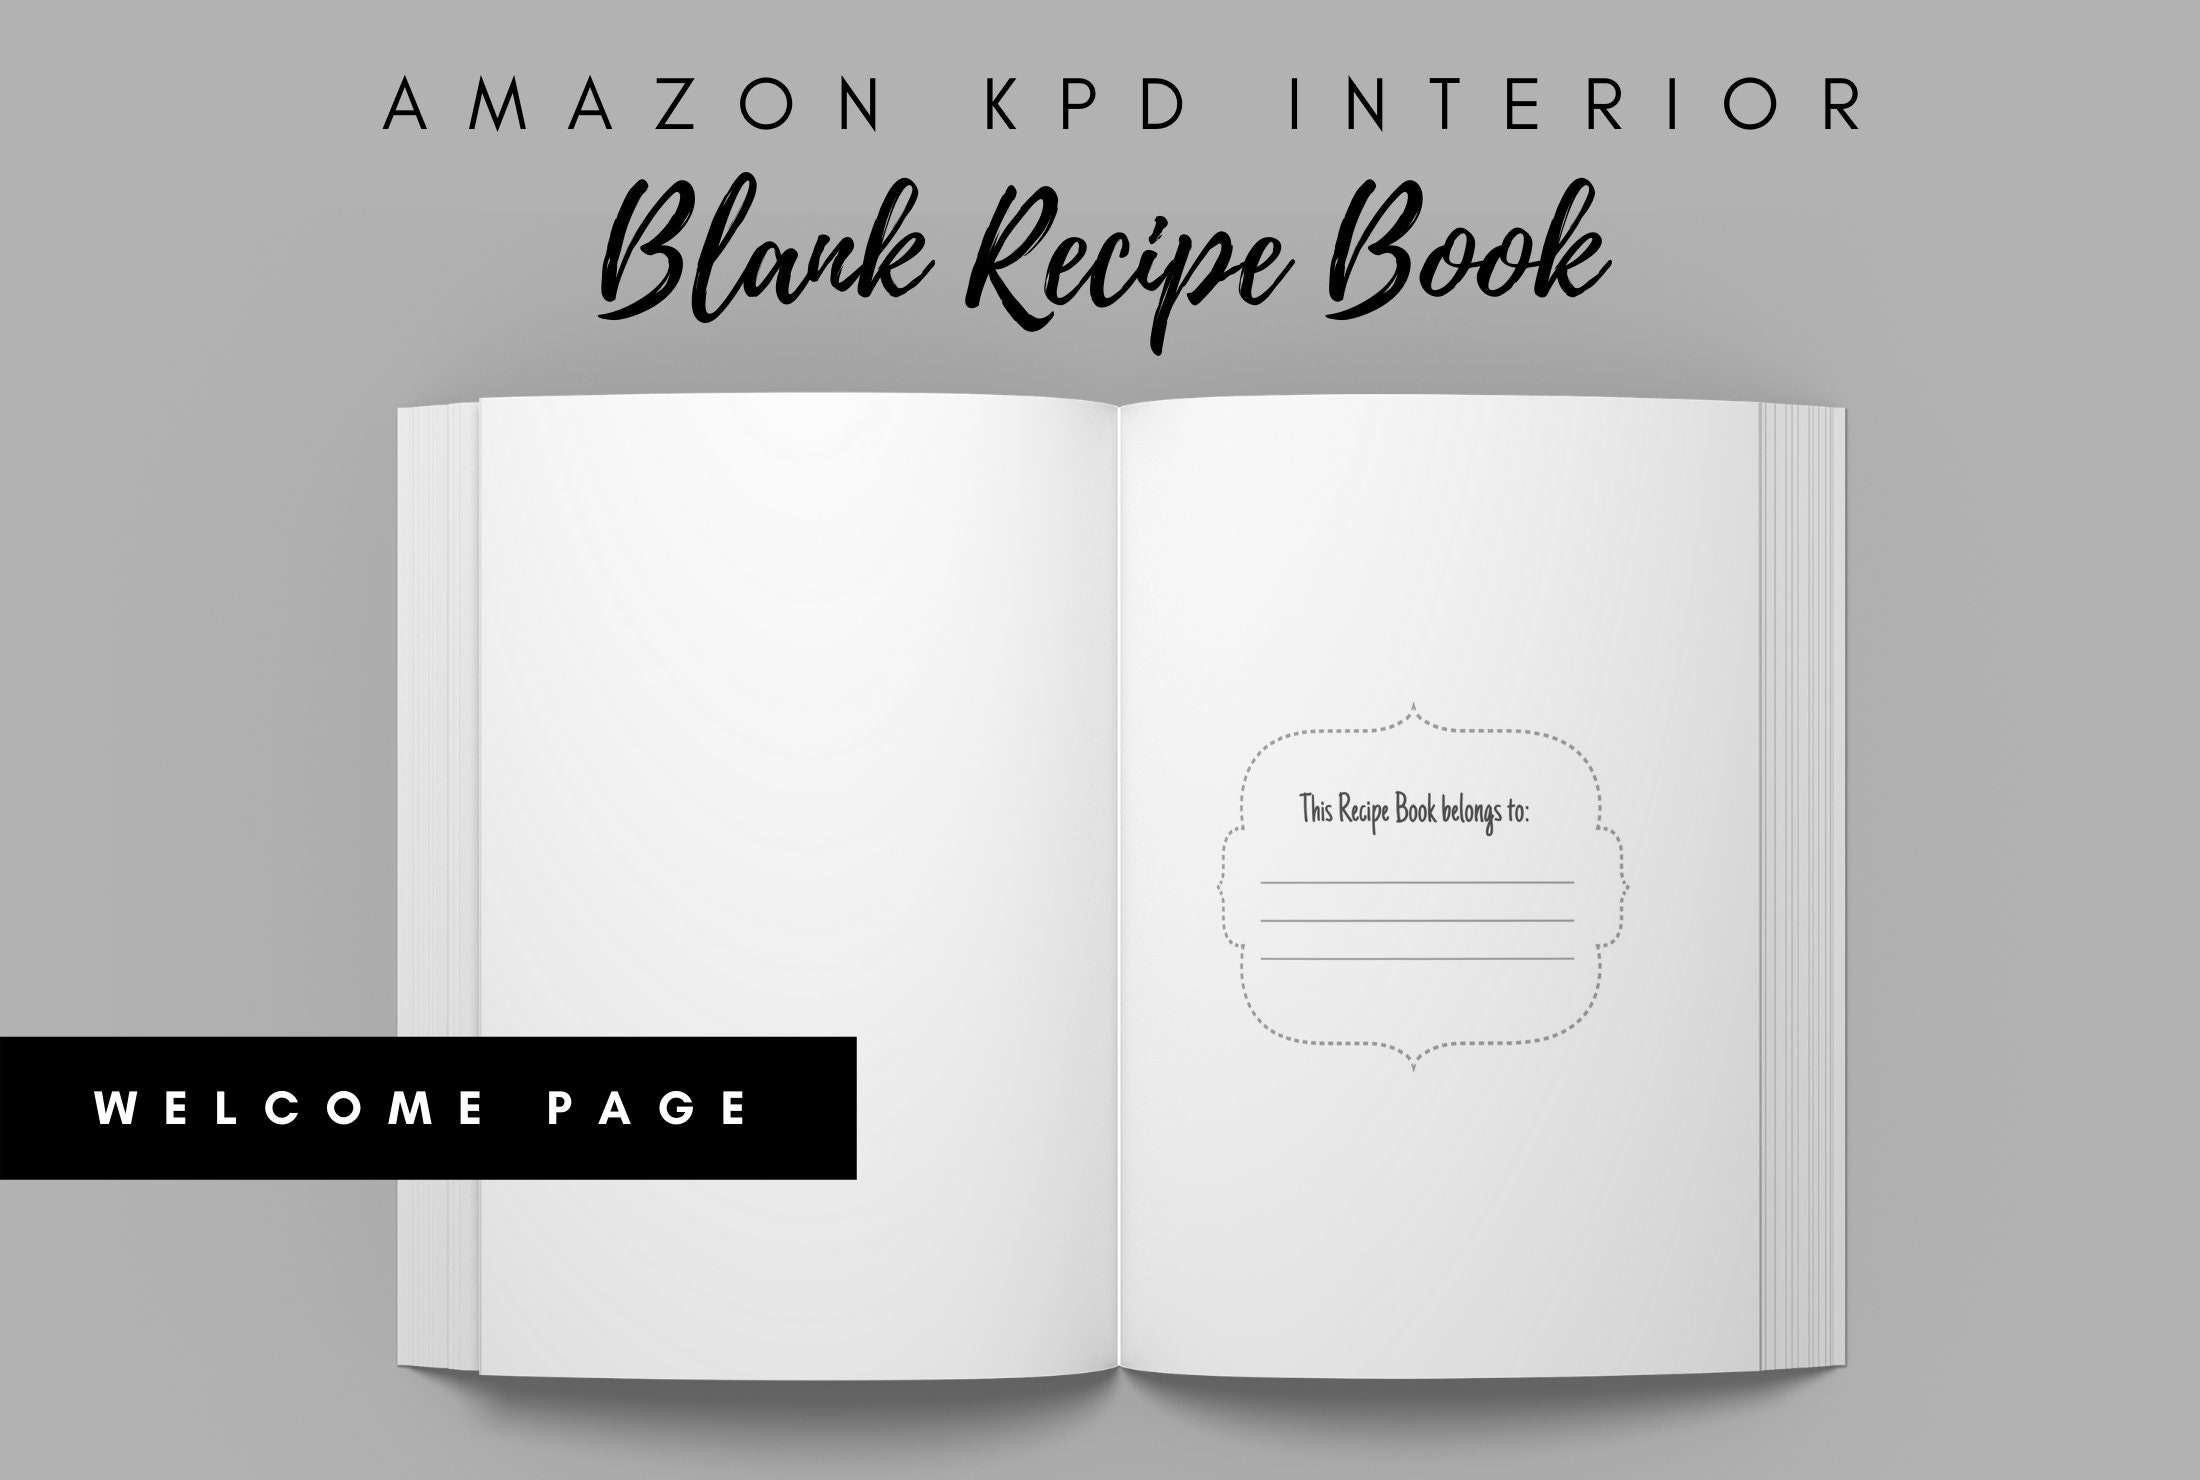 Recipe Book Blank Pages / KDP Interior Graphic by mostafiz19542